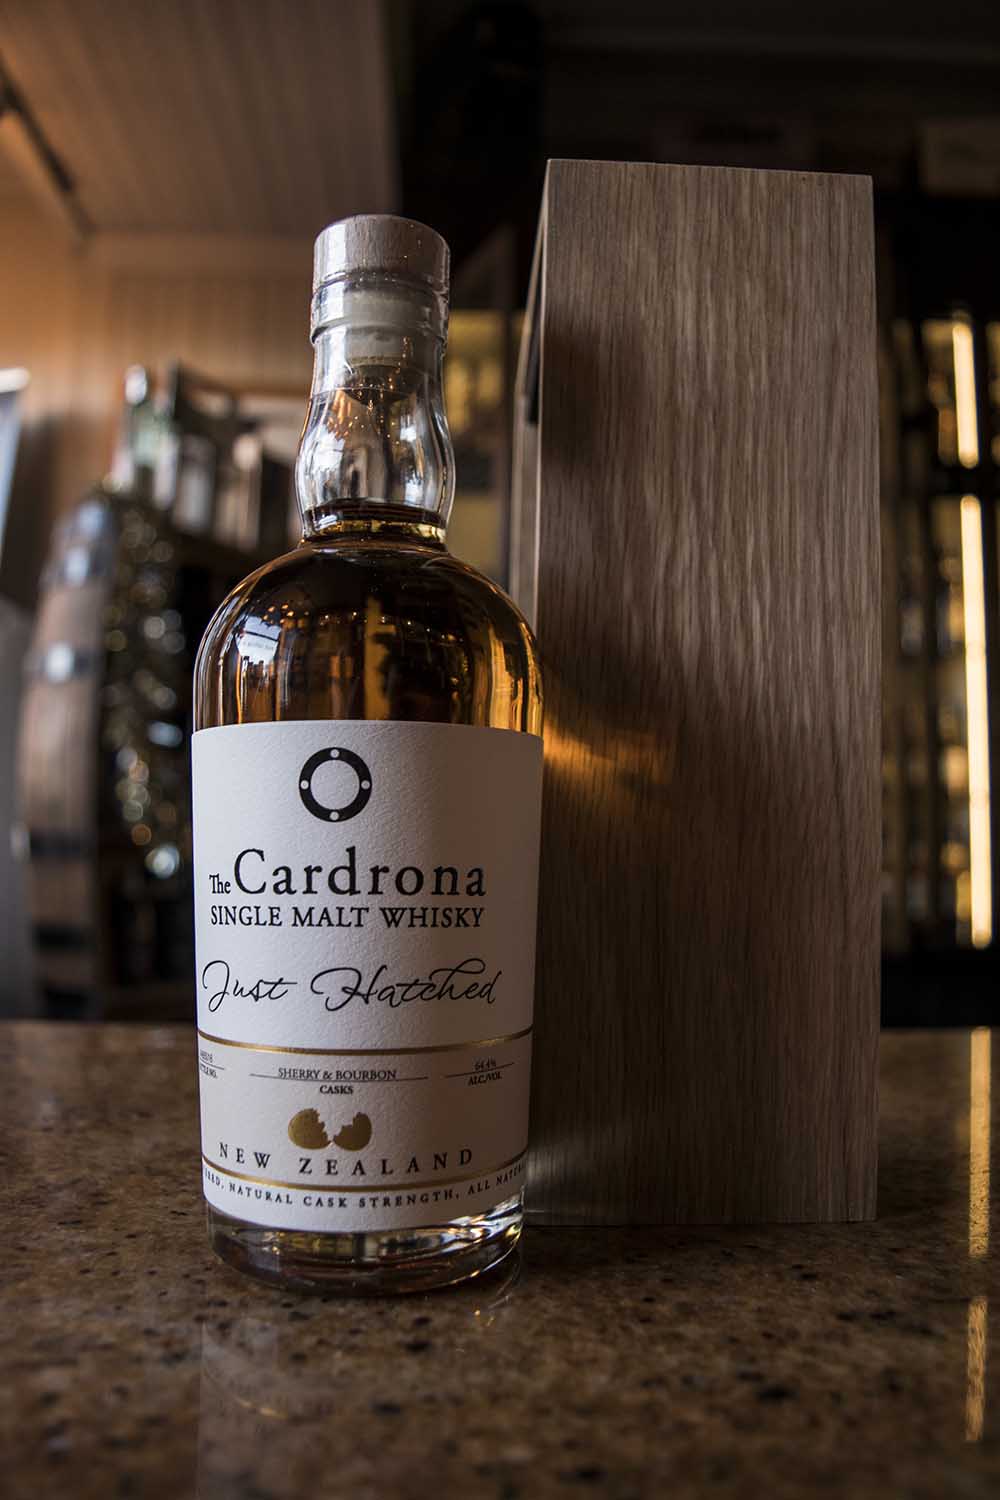 Cardrona, single malt whisky, "Just Hatched" 35cl review